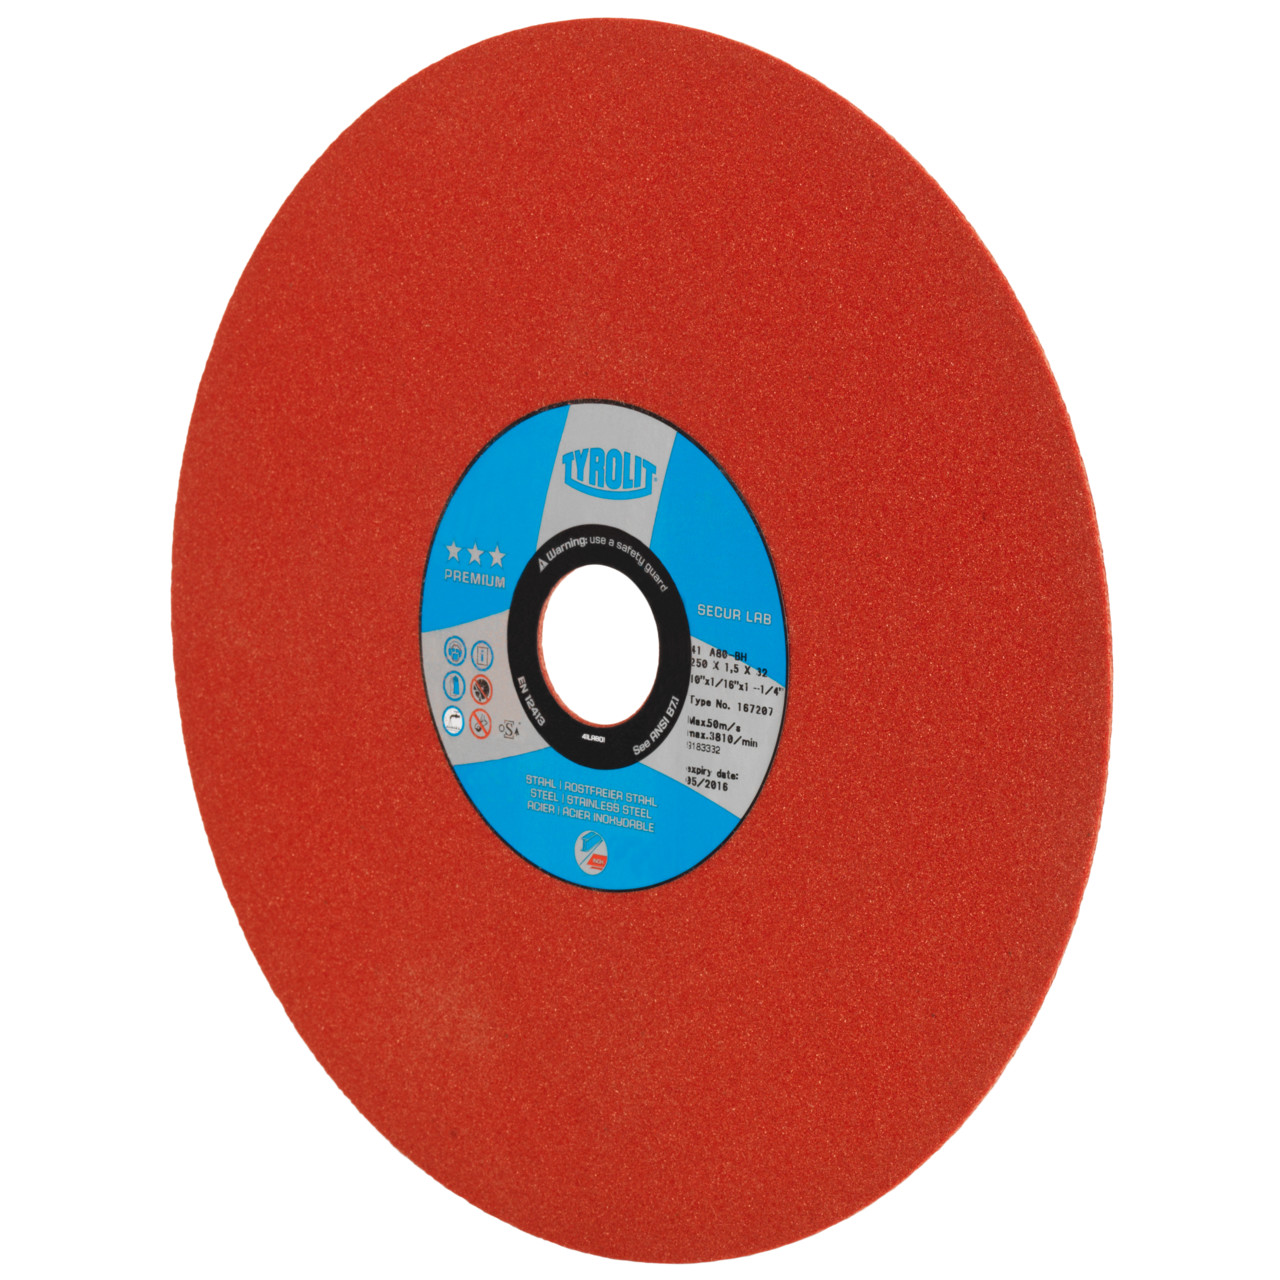 Tyrolit Laboratory cutting discs DxDxH 250x1.8x32 For steel and stainless steel, shape: 41N - straight version (non-woven cutting disc), Art. 596848